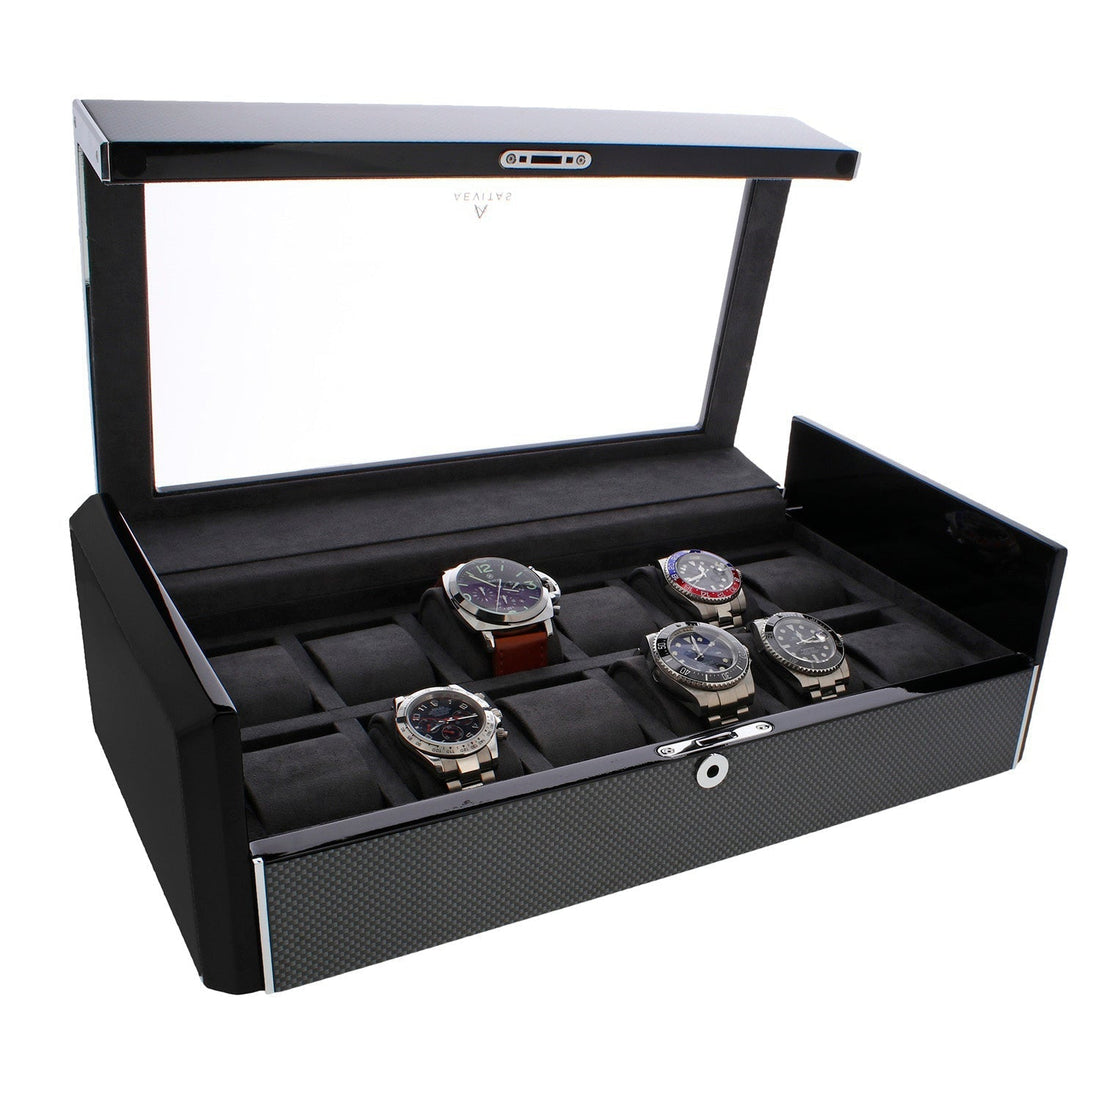 Why you should buy a Watch Box from http://www.Aevitas-UK.co.uk